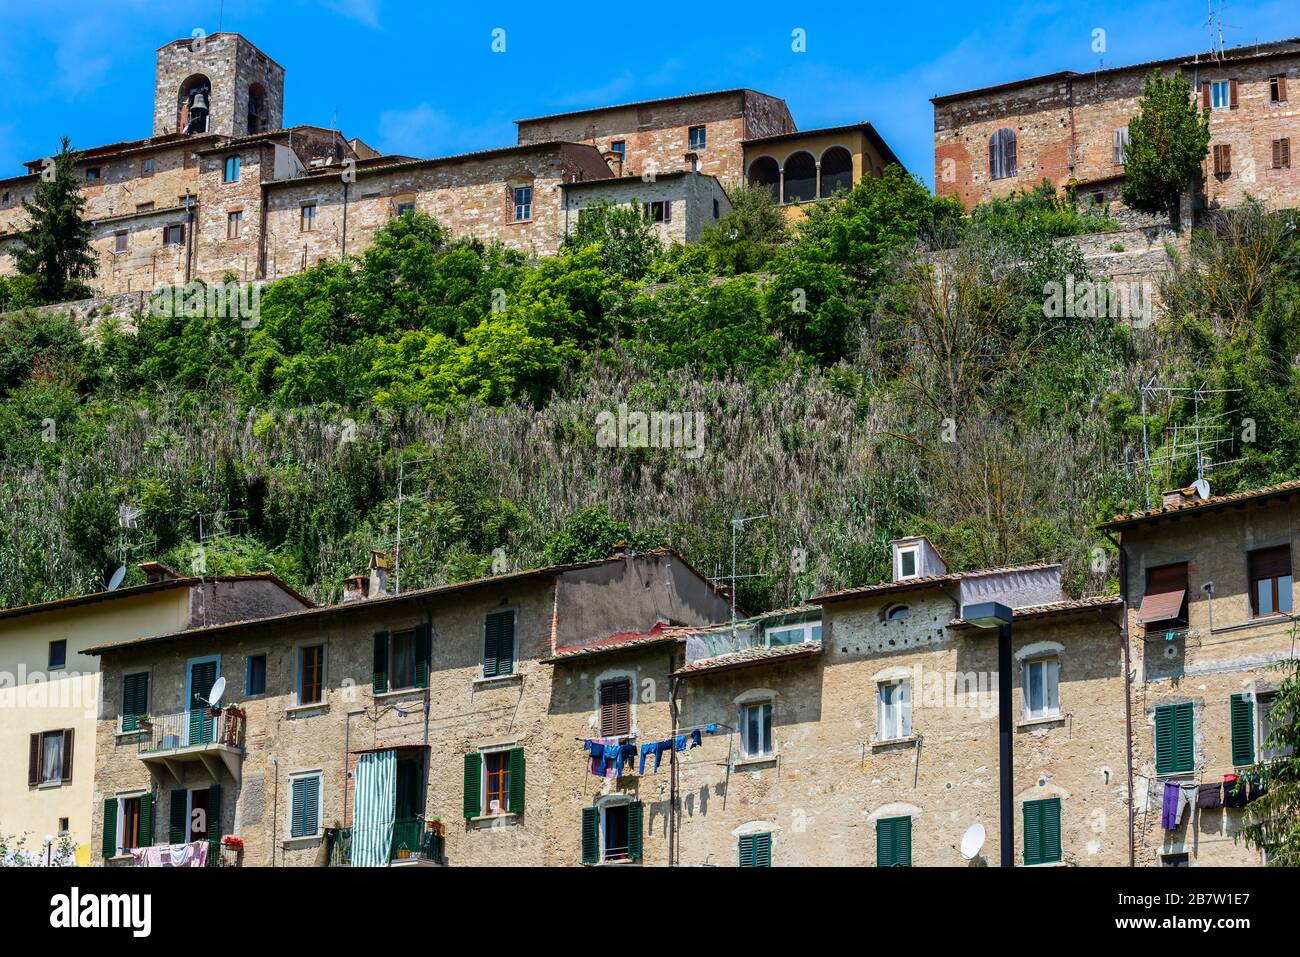 Colle di Val d'Elsa, Tuscany / Italy: Characteristic houses of the picturesque well-preserved historic upper town Colle Alta seen from the lower town. Stock Photo